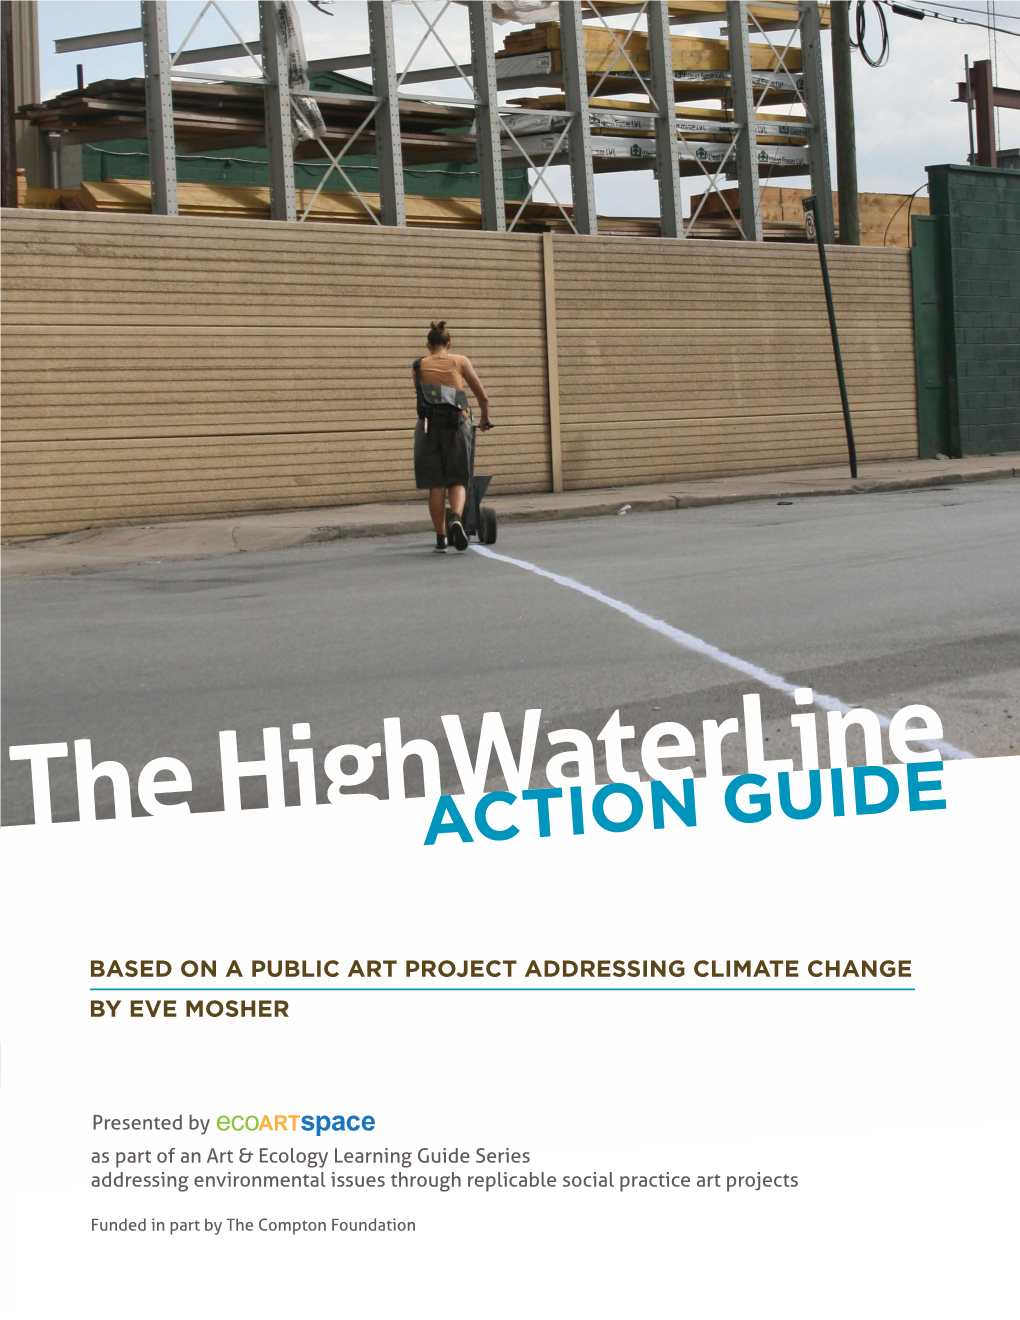 The Highwaterline ACTION GUIDE